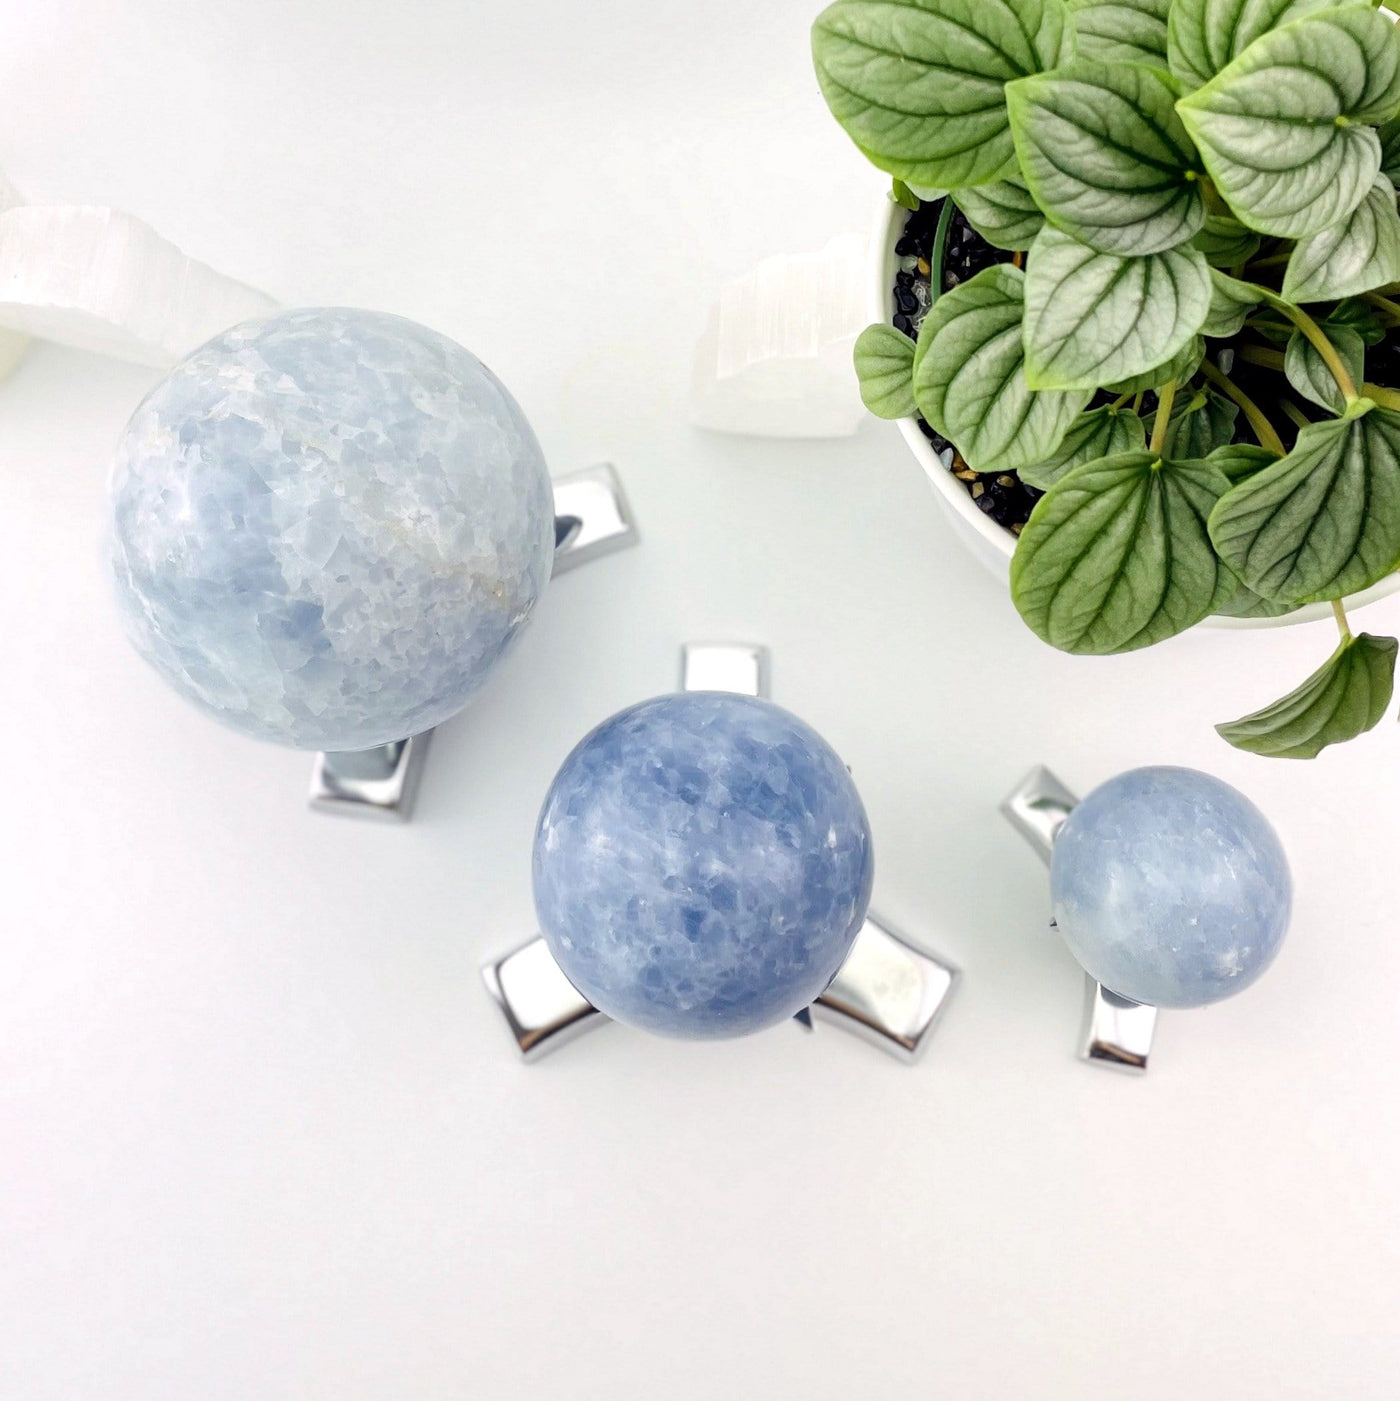 Overhead view of the three sizes of sphere stands with blue calcite crystals on them.